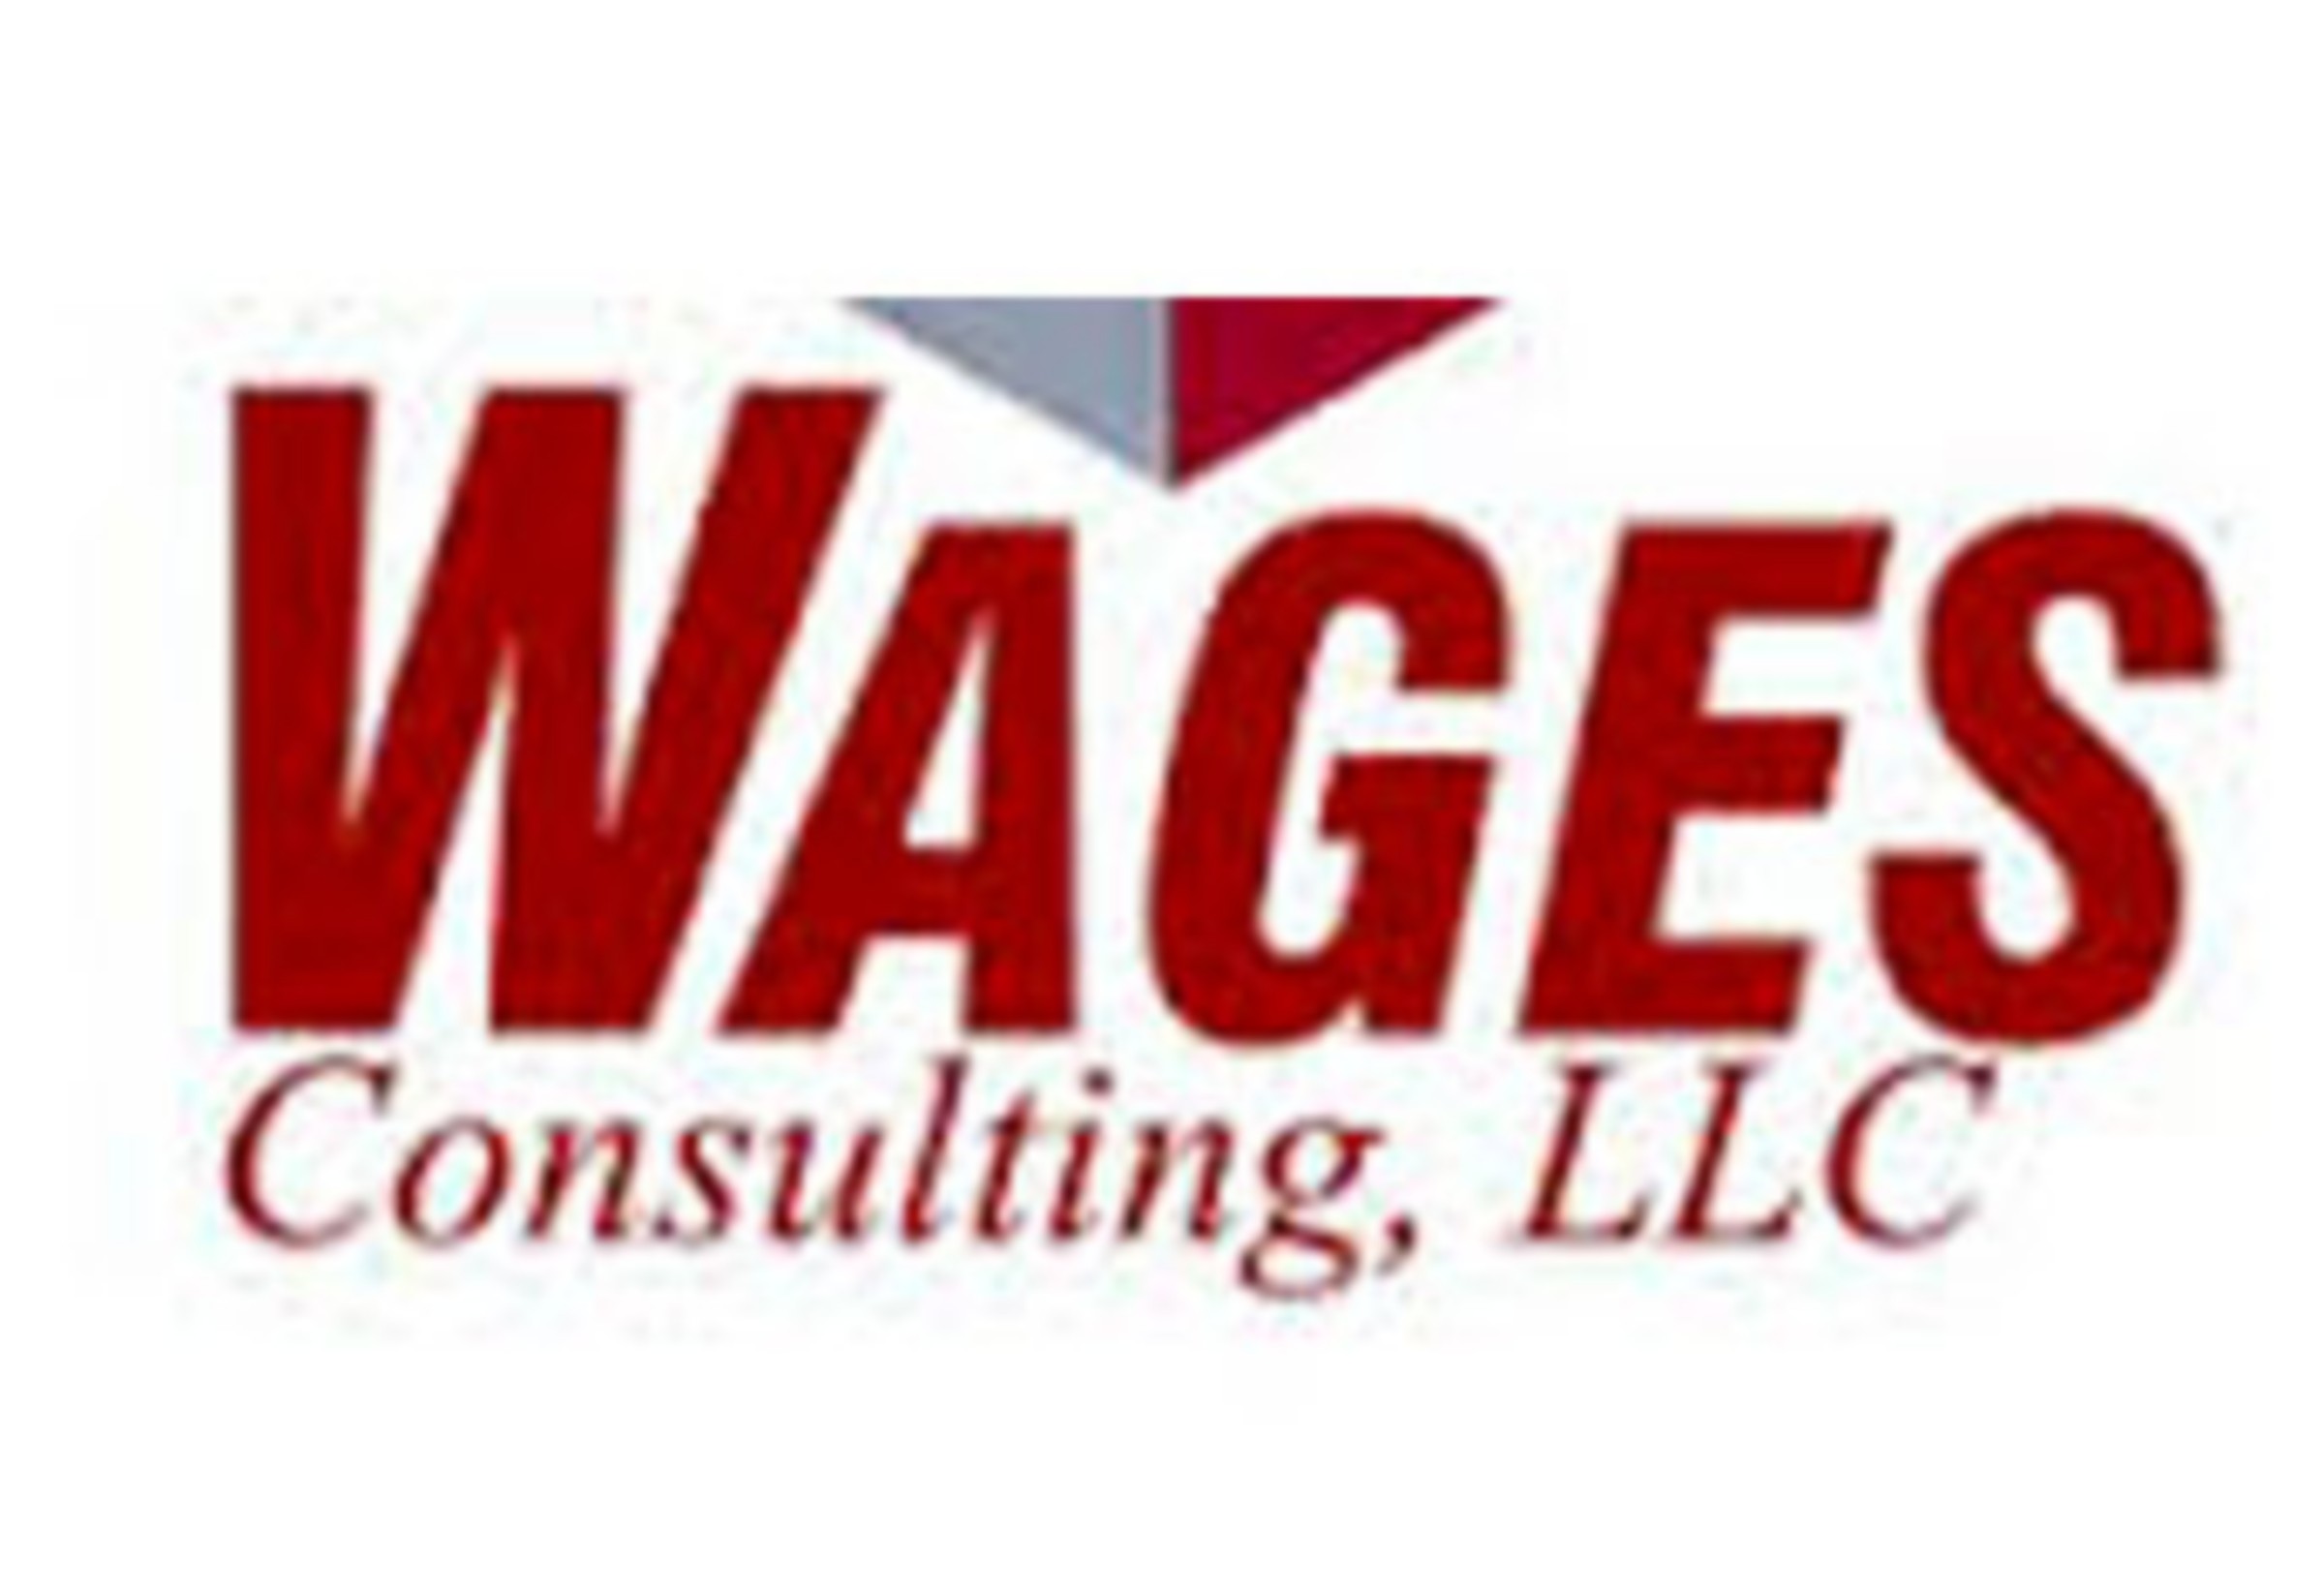 Wages Consulting LLC